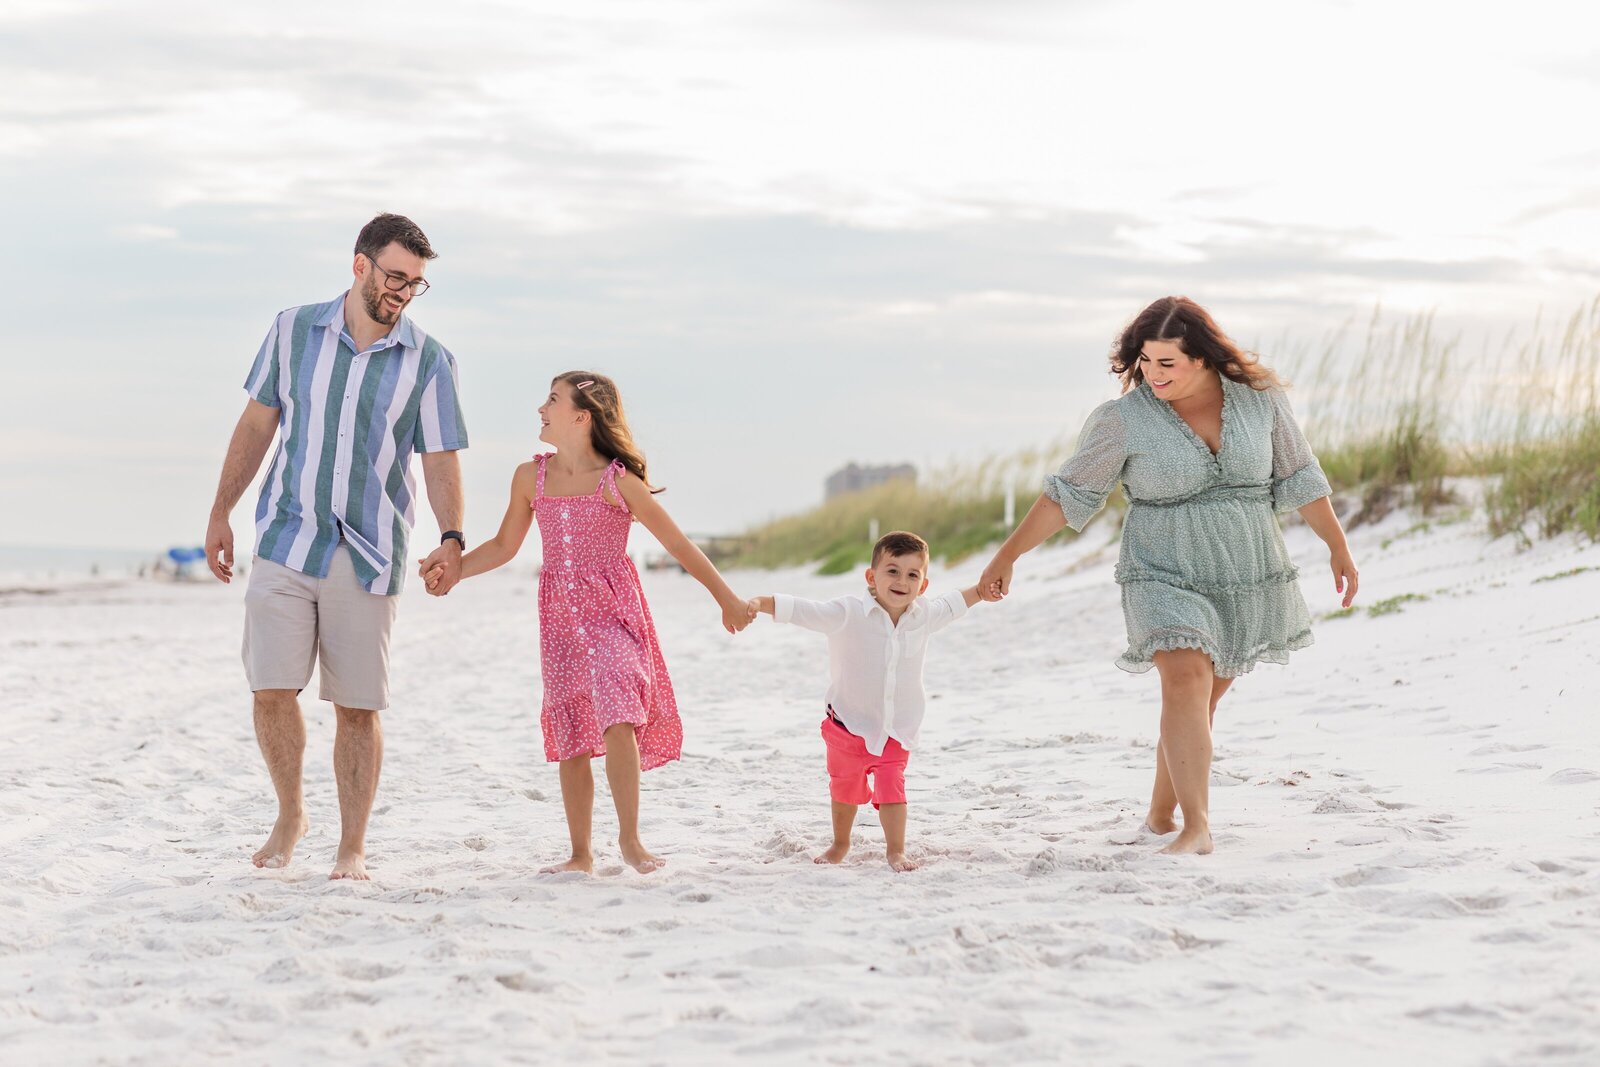 Pensacola Beach vacation family photo session .  Family holding hands walking down beach.